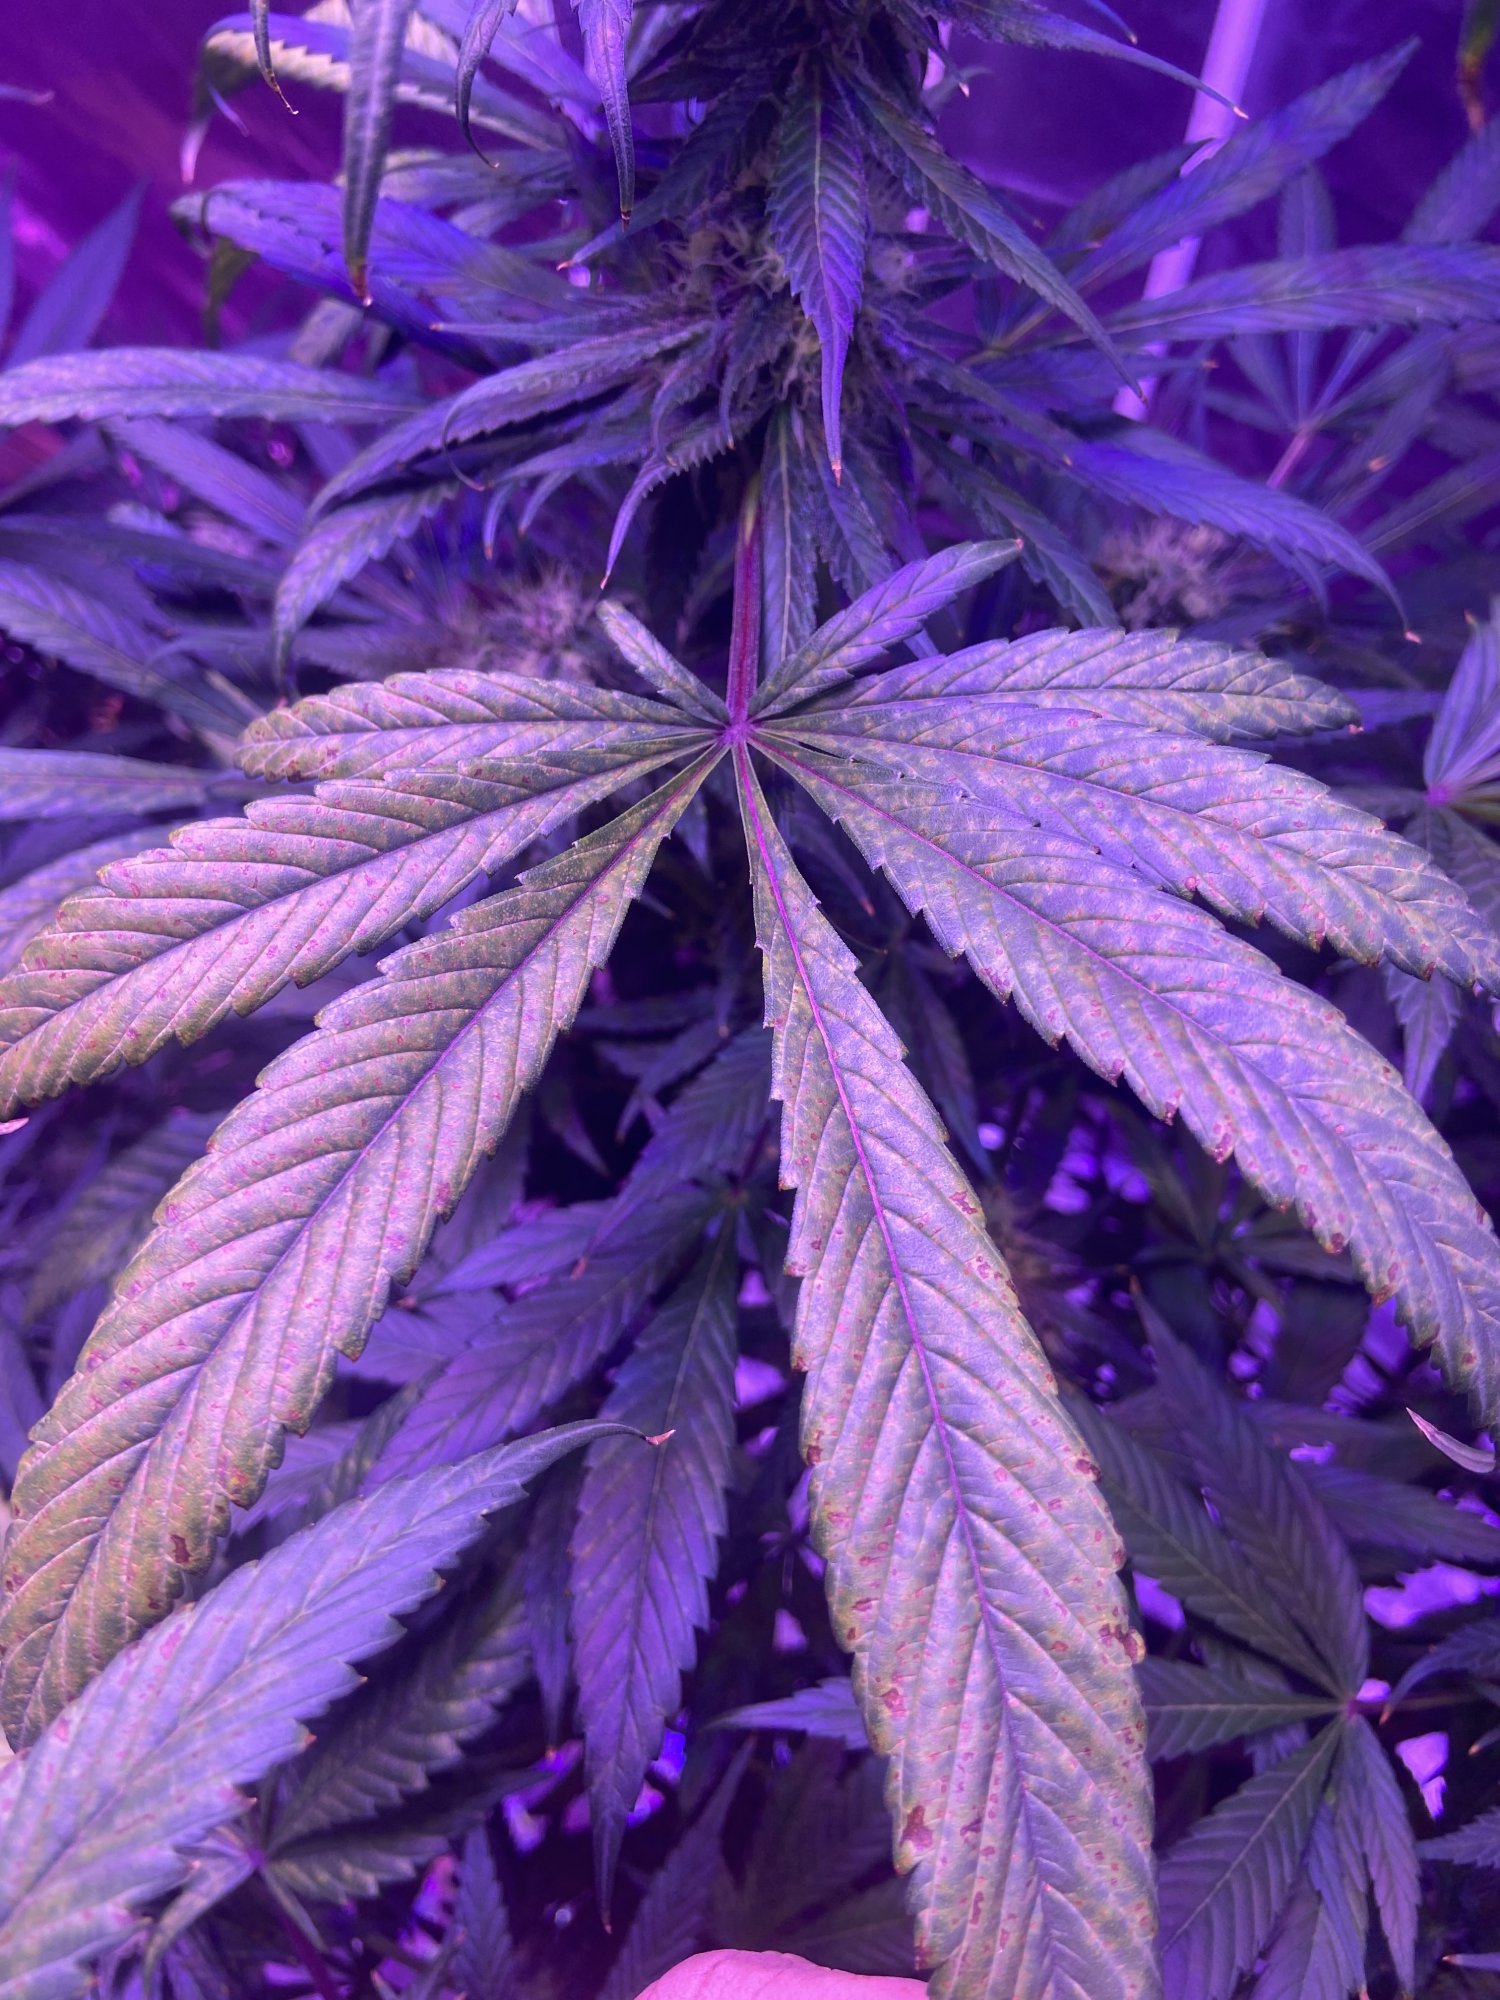 Help a new grower identify the deficiency please 3